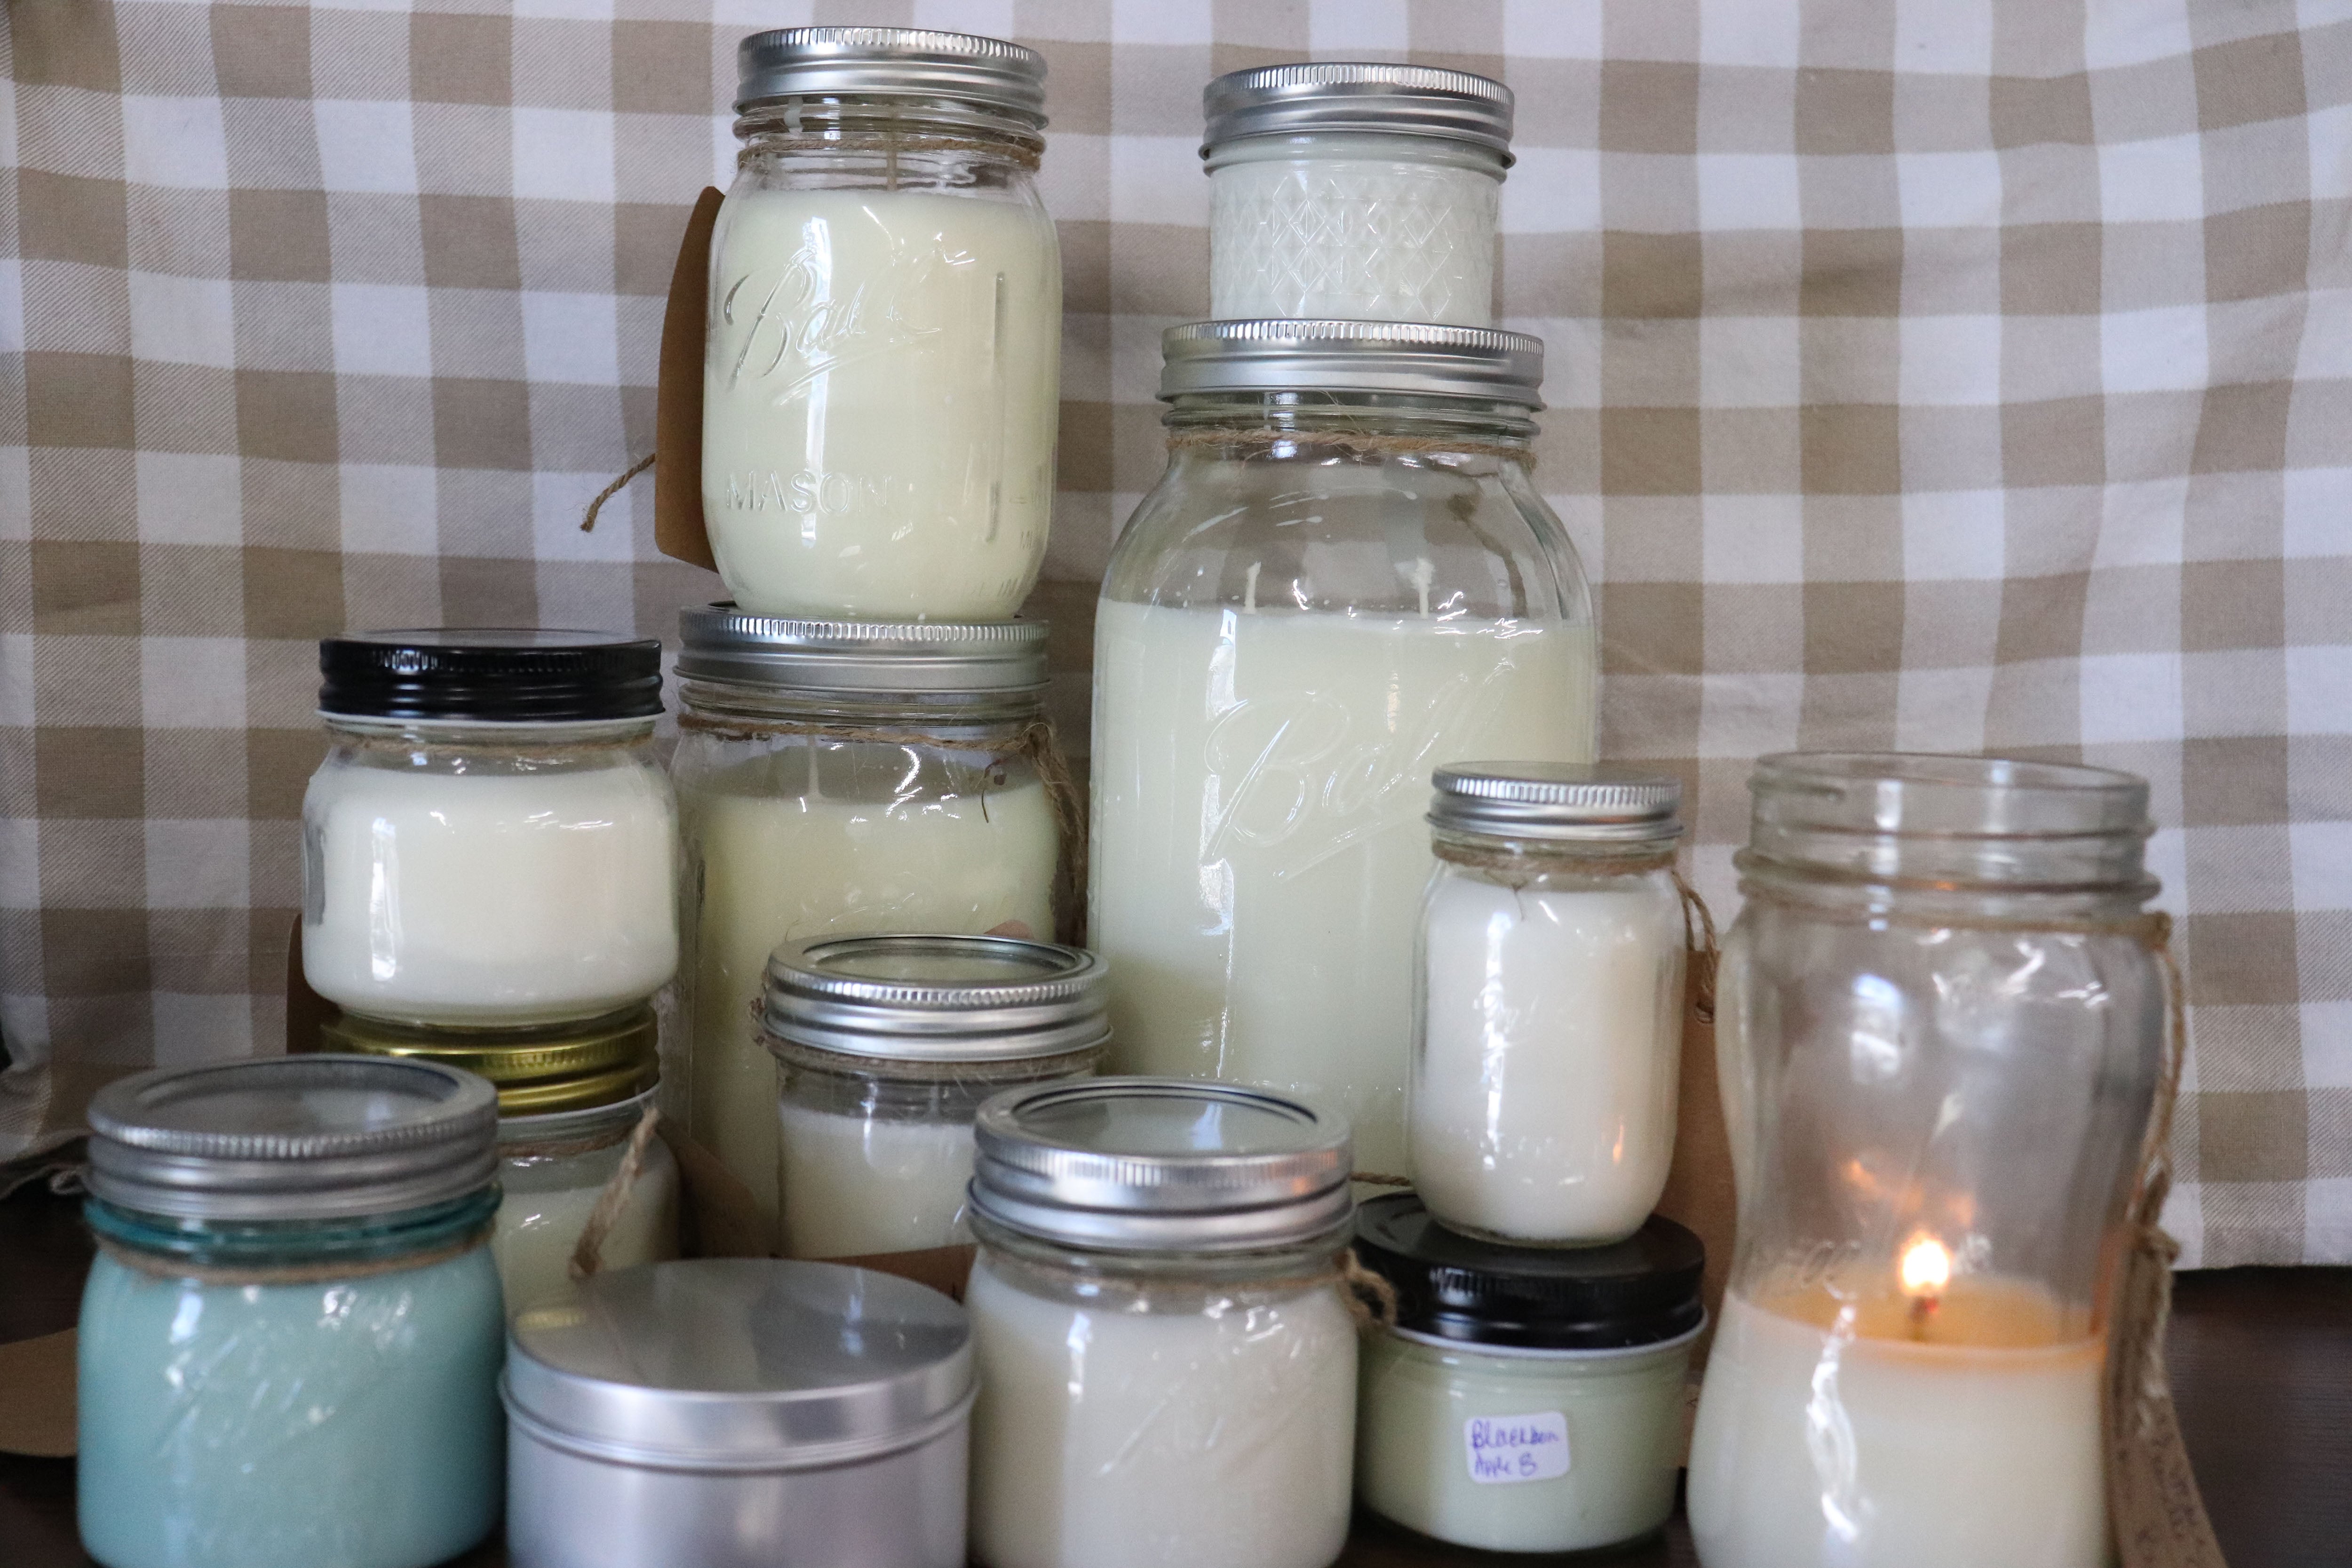 Wholesale Candles for Retailers